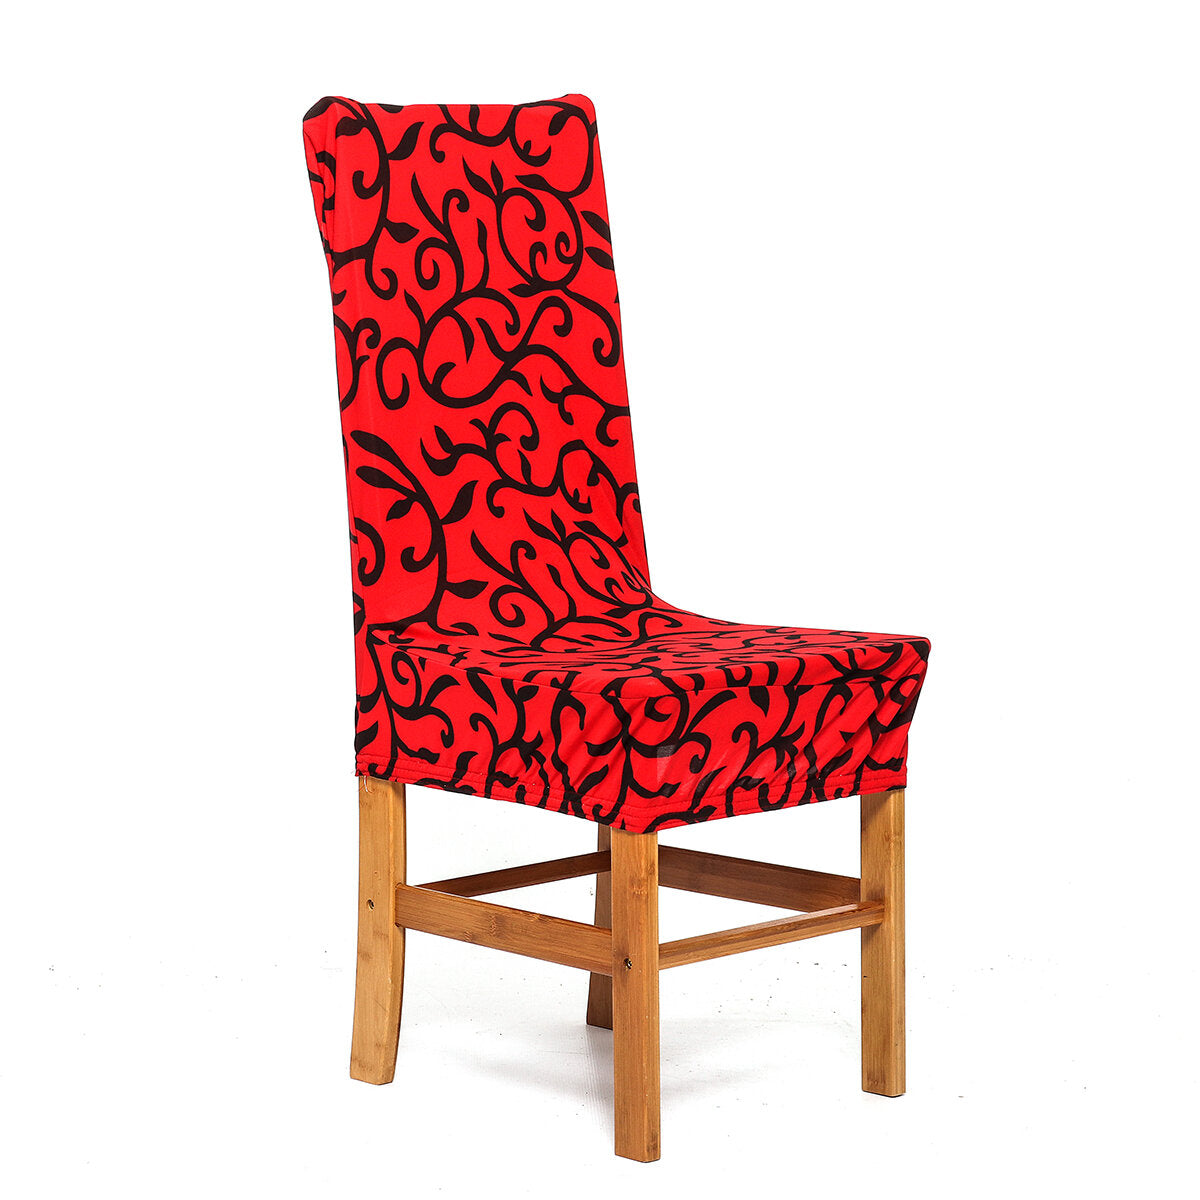 Elastic Dining Chair Cover Printing Stretch Chair Seat Slipcover Office Computer Chair Protector Home Office Furniture Decor